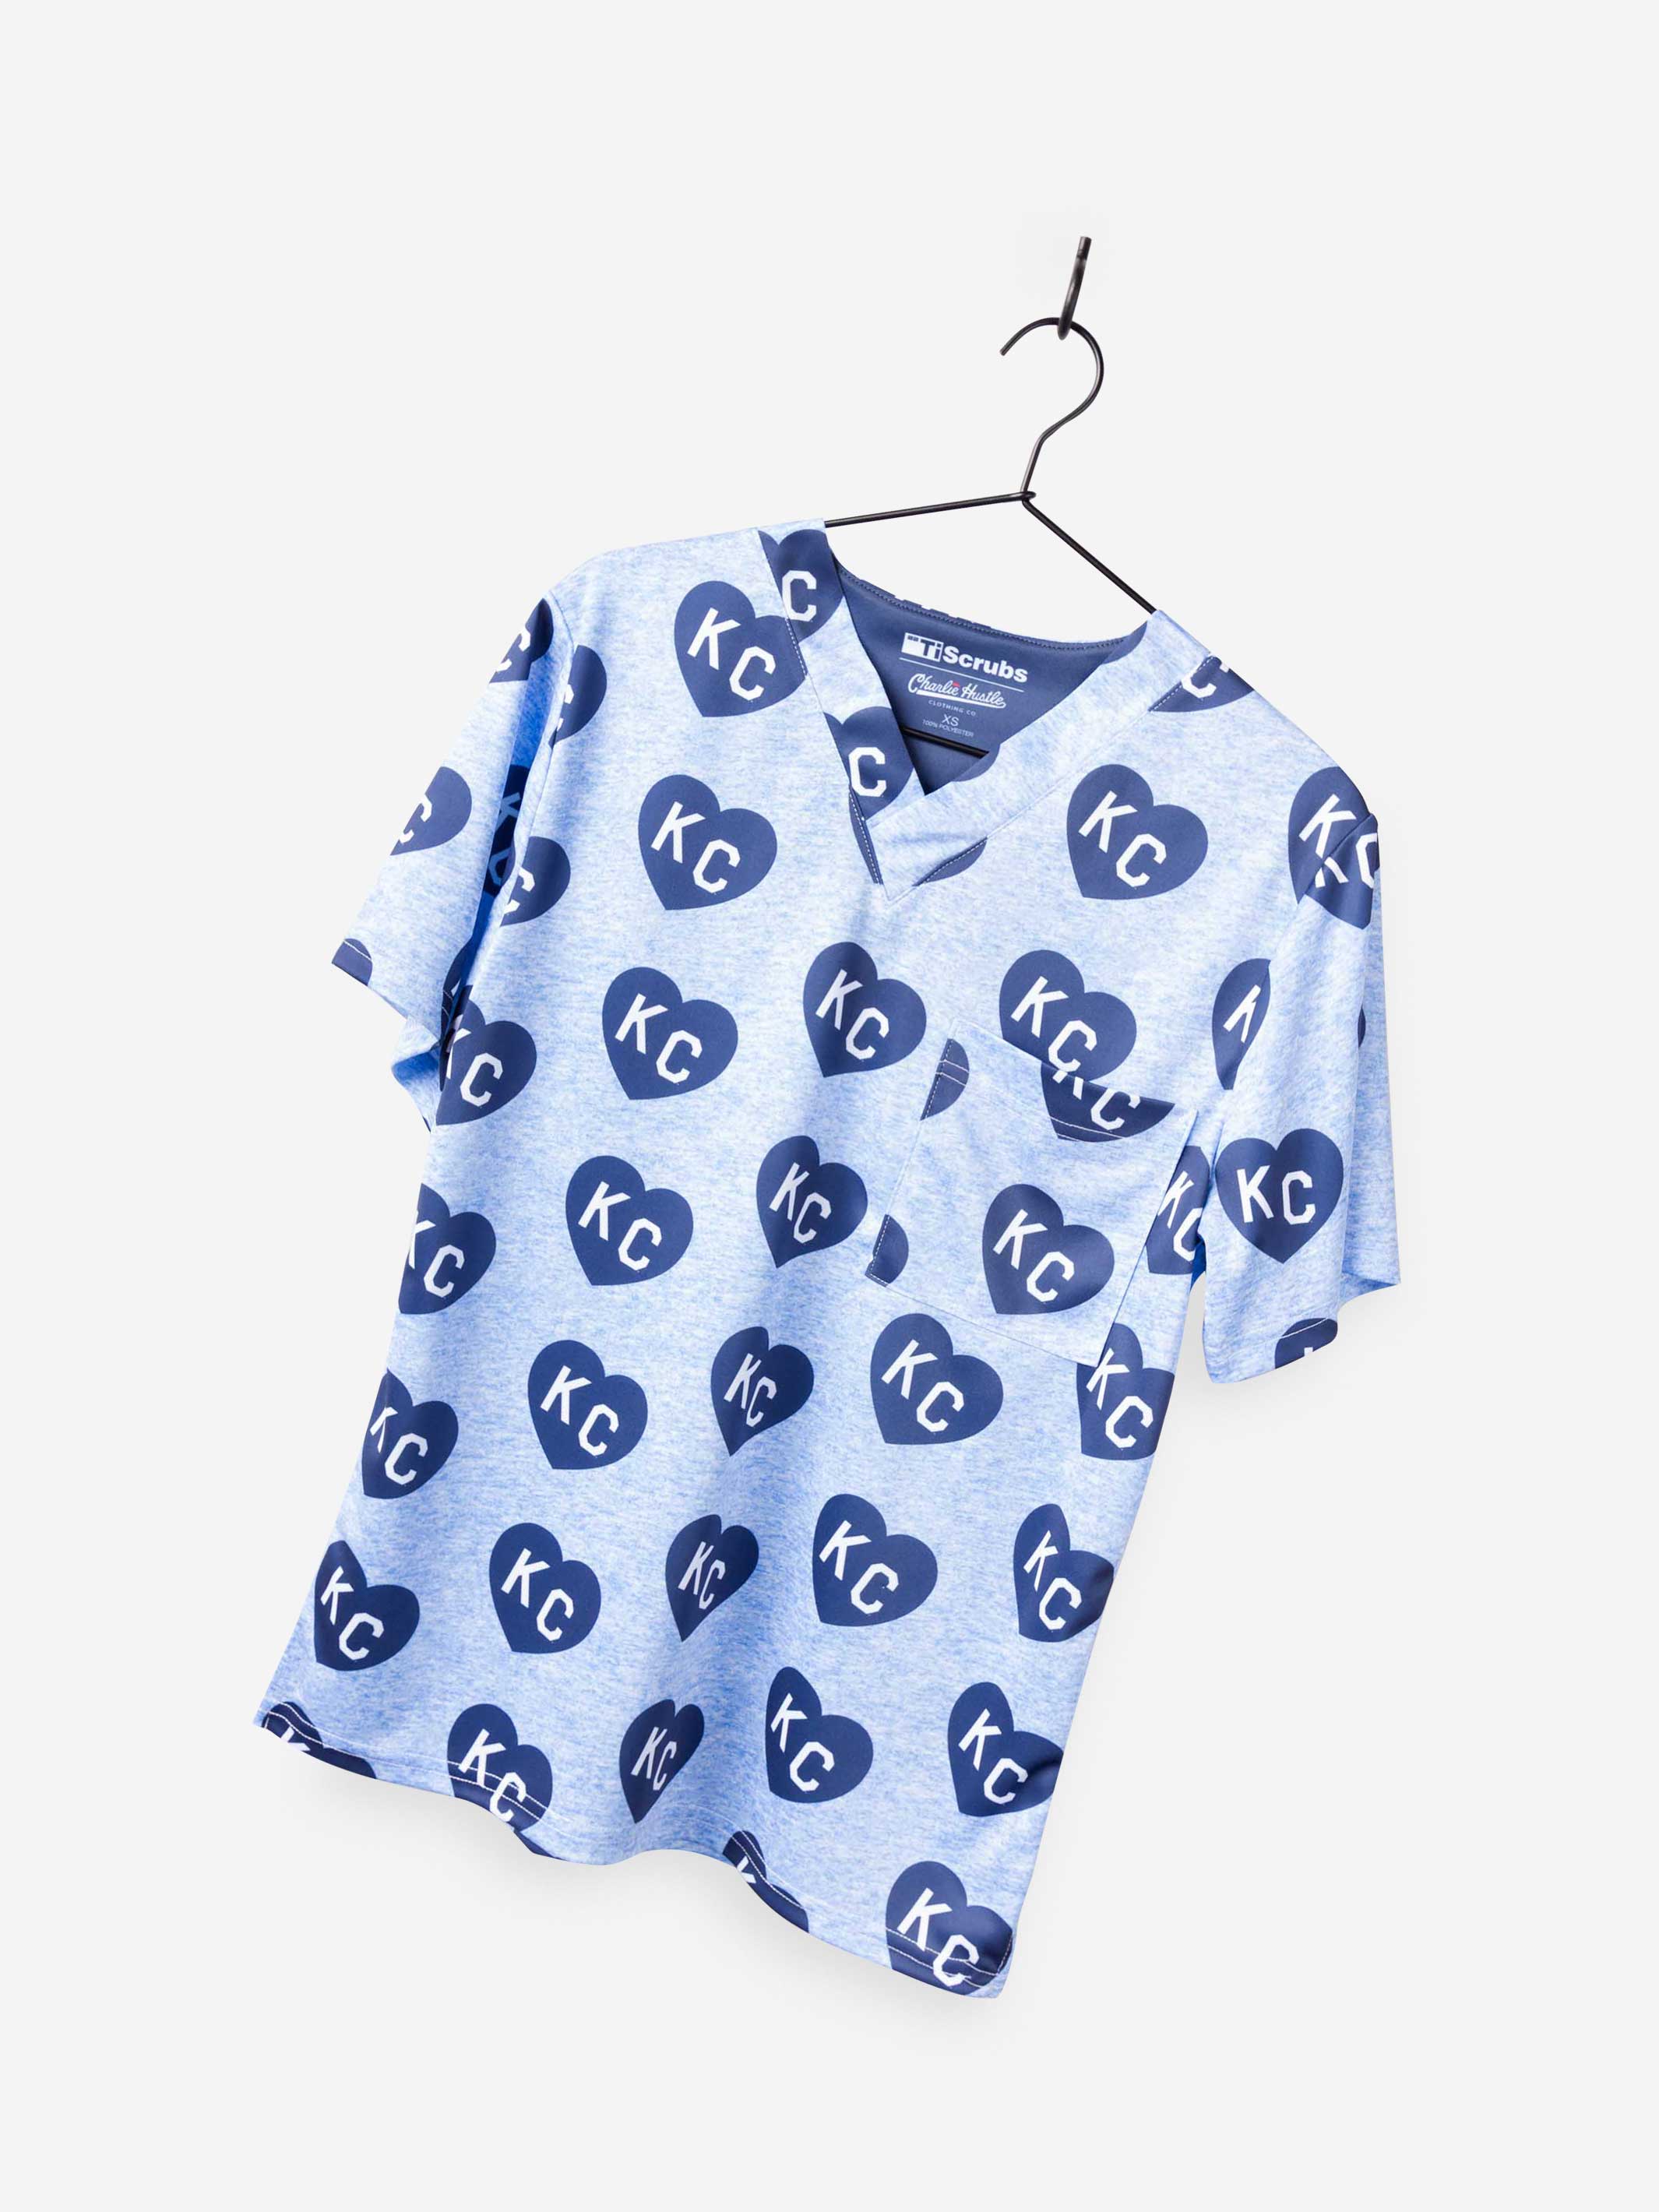 Men&#39;s Charlie Hustle Print Scrub Top with KC Heart All Over Pattern in Navy and Blue on stretch performance fabric